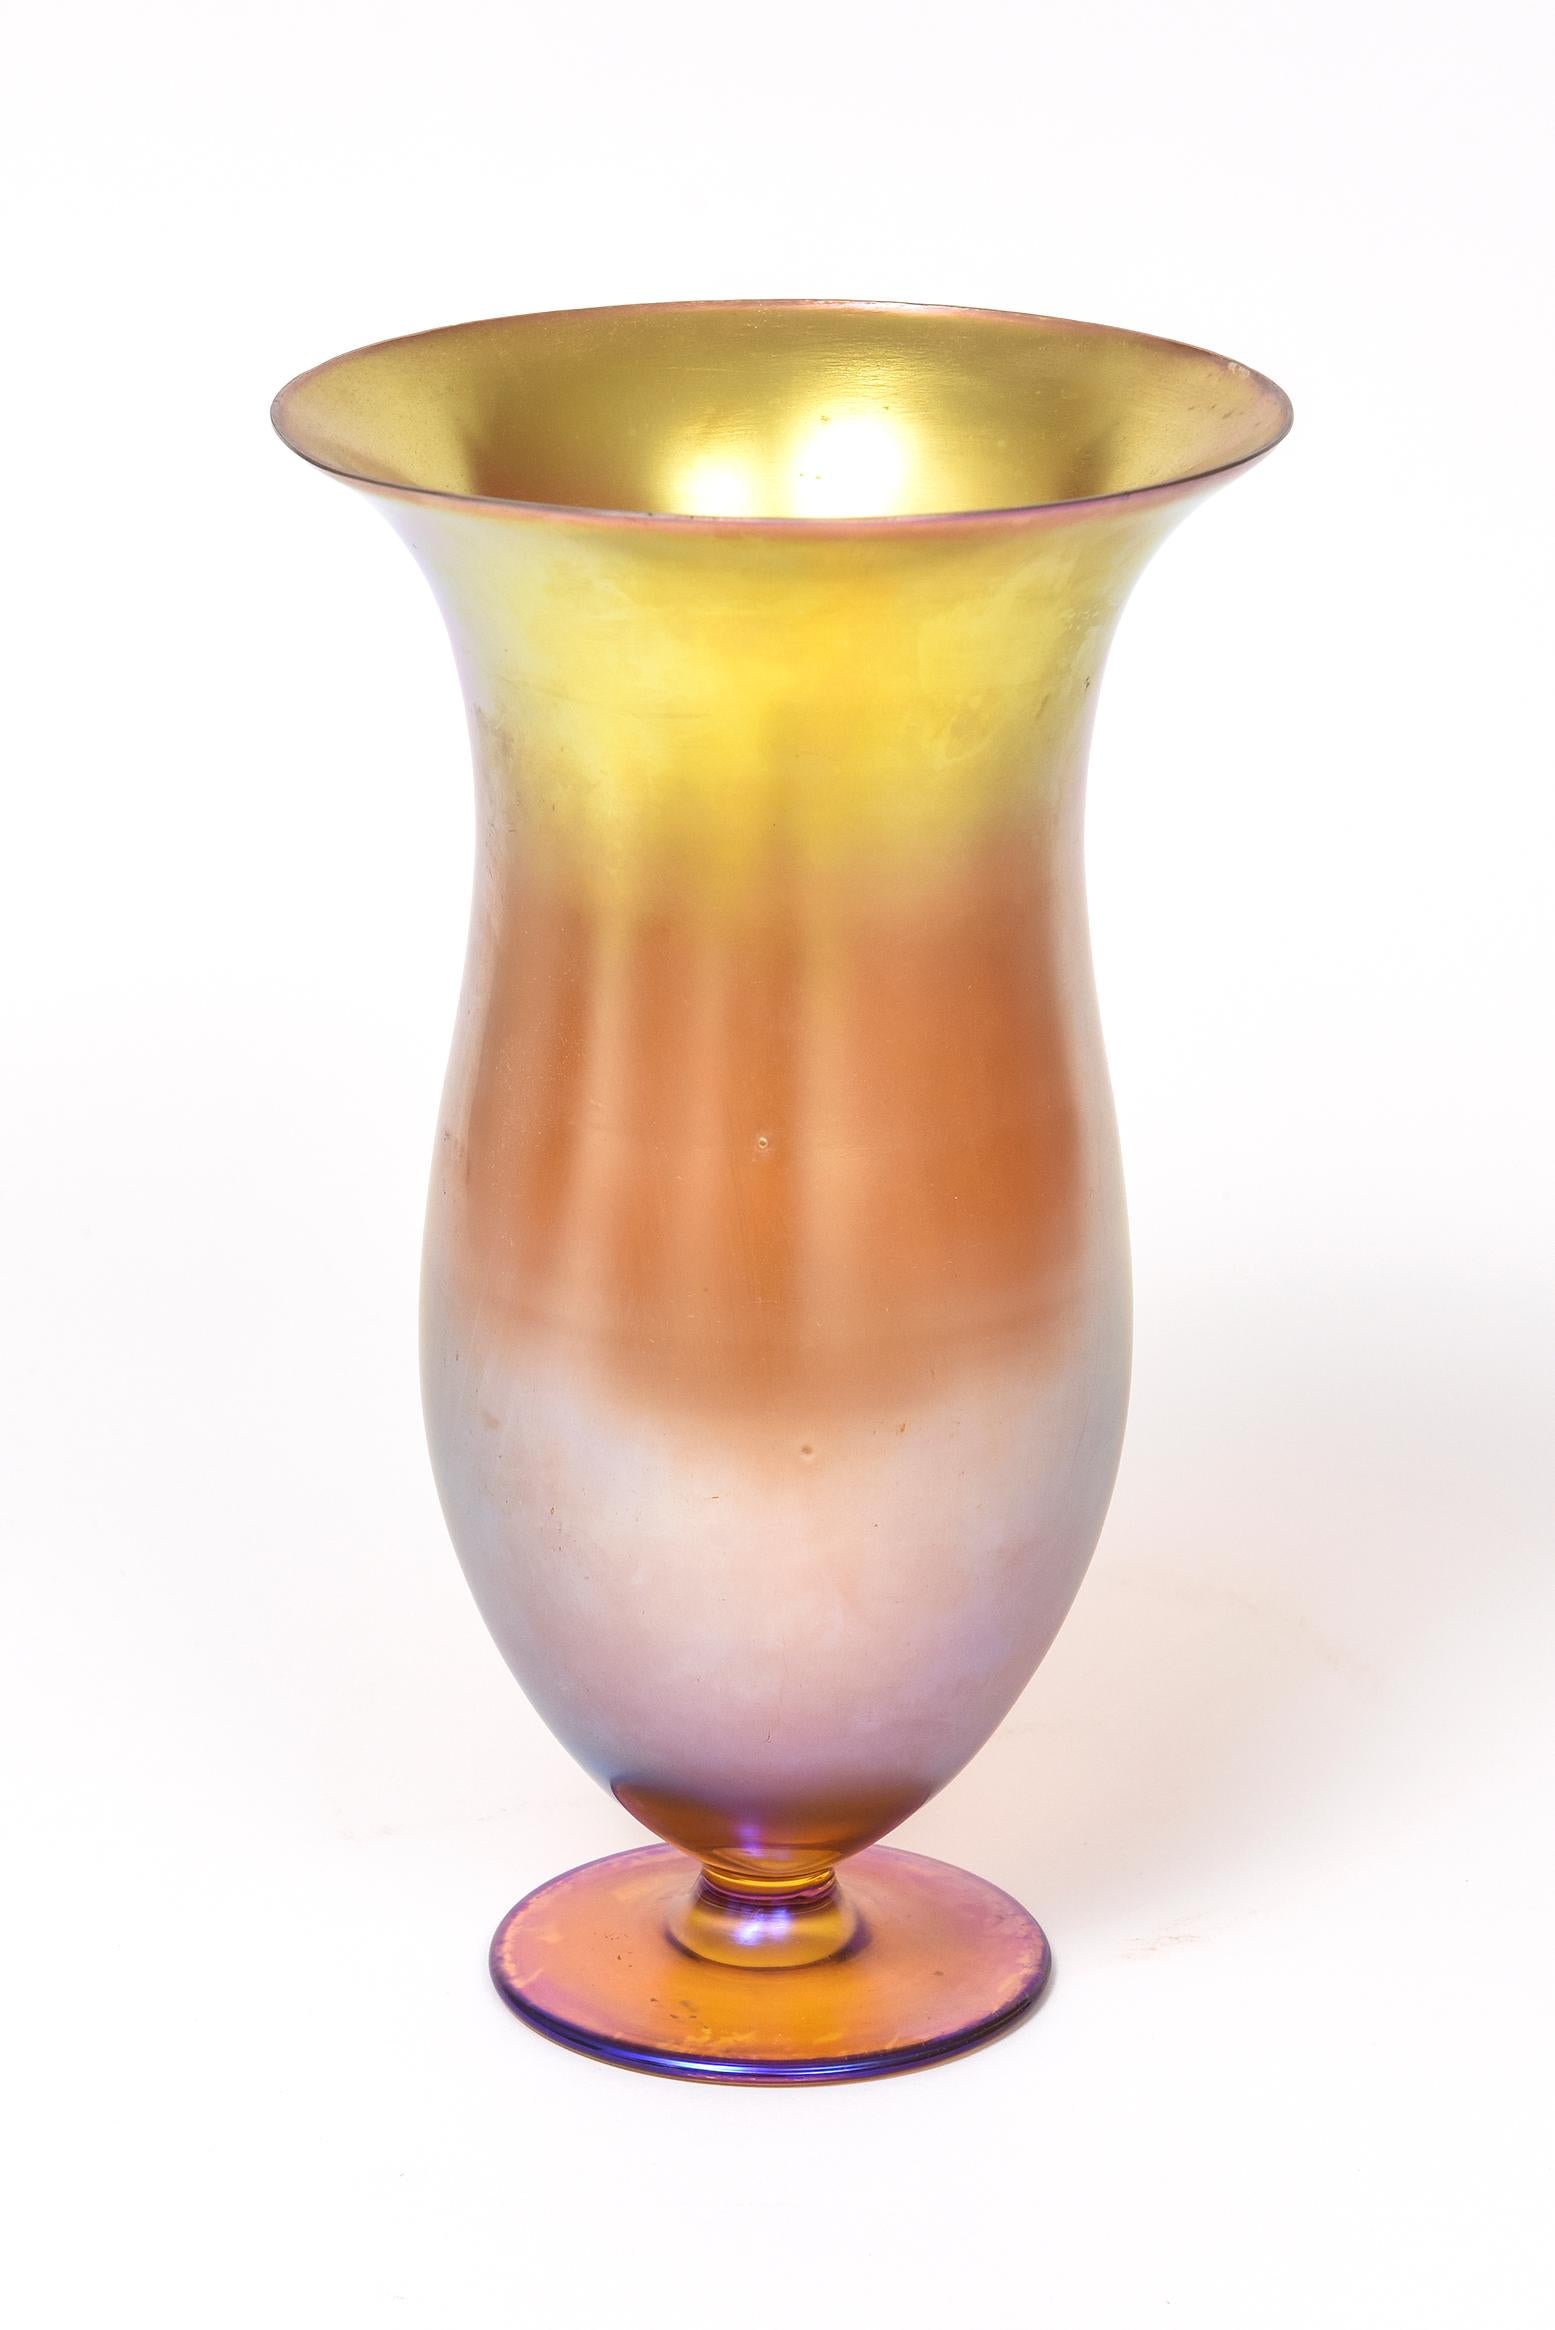 Stunning large art glass vase attributed to WMF in the 1930s. Measures: 10.5